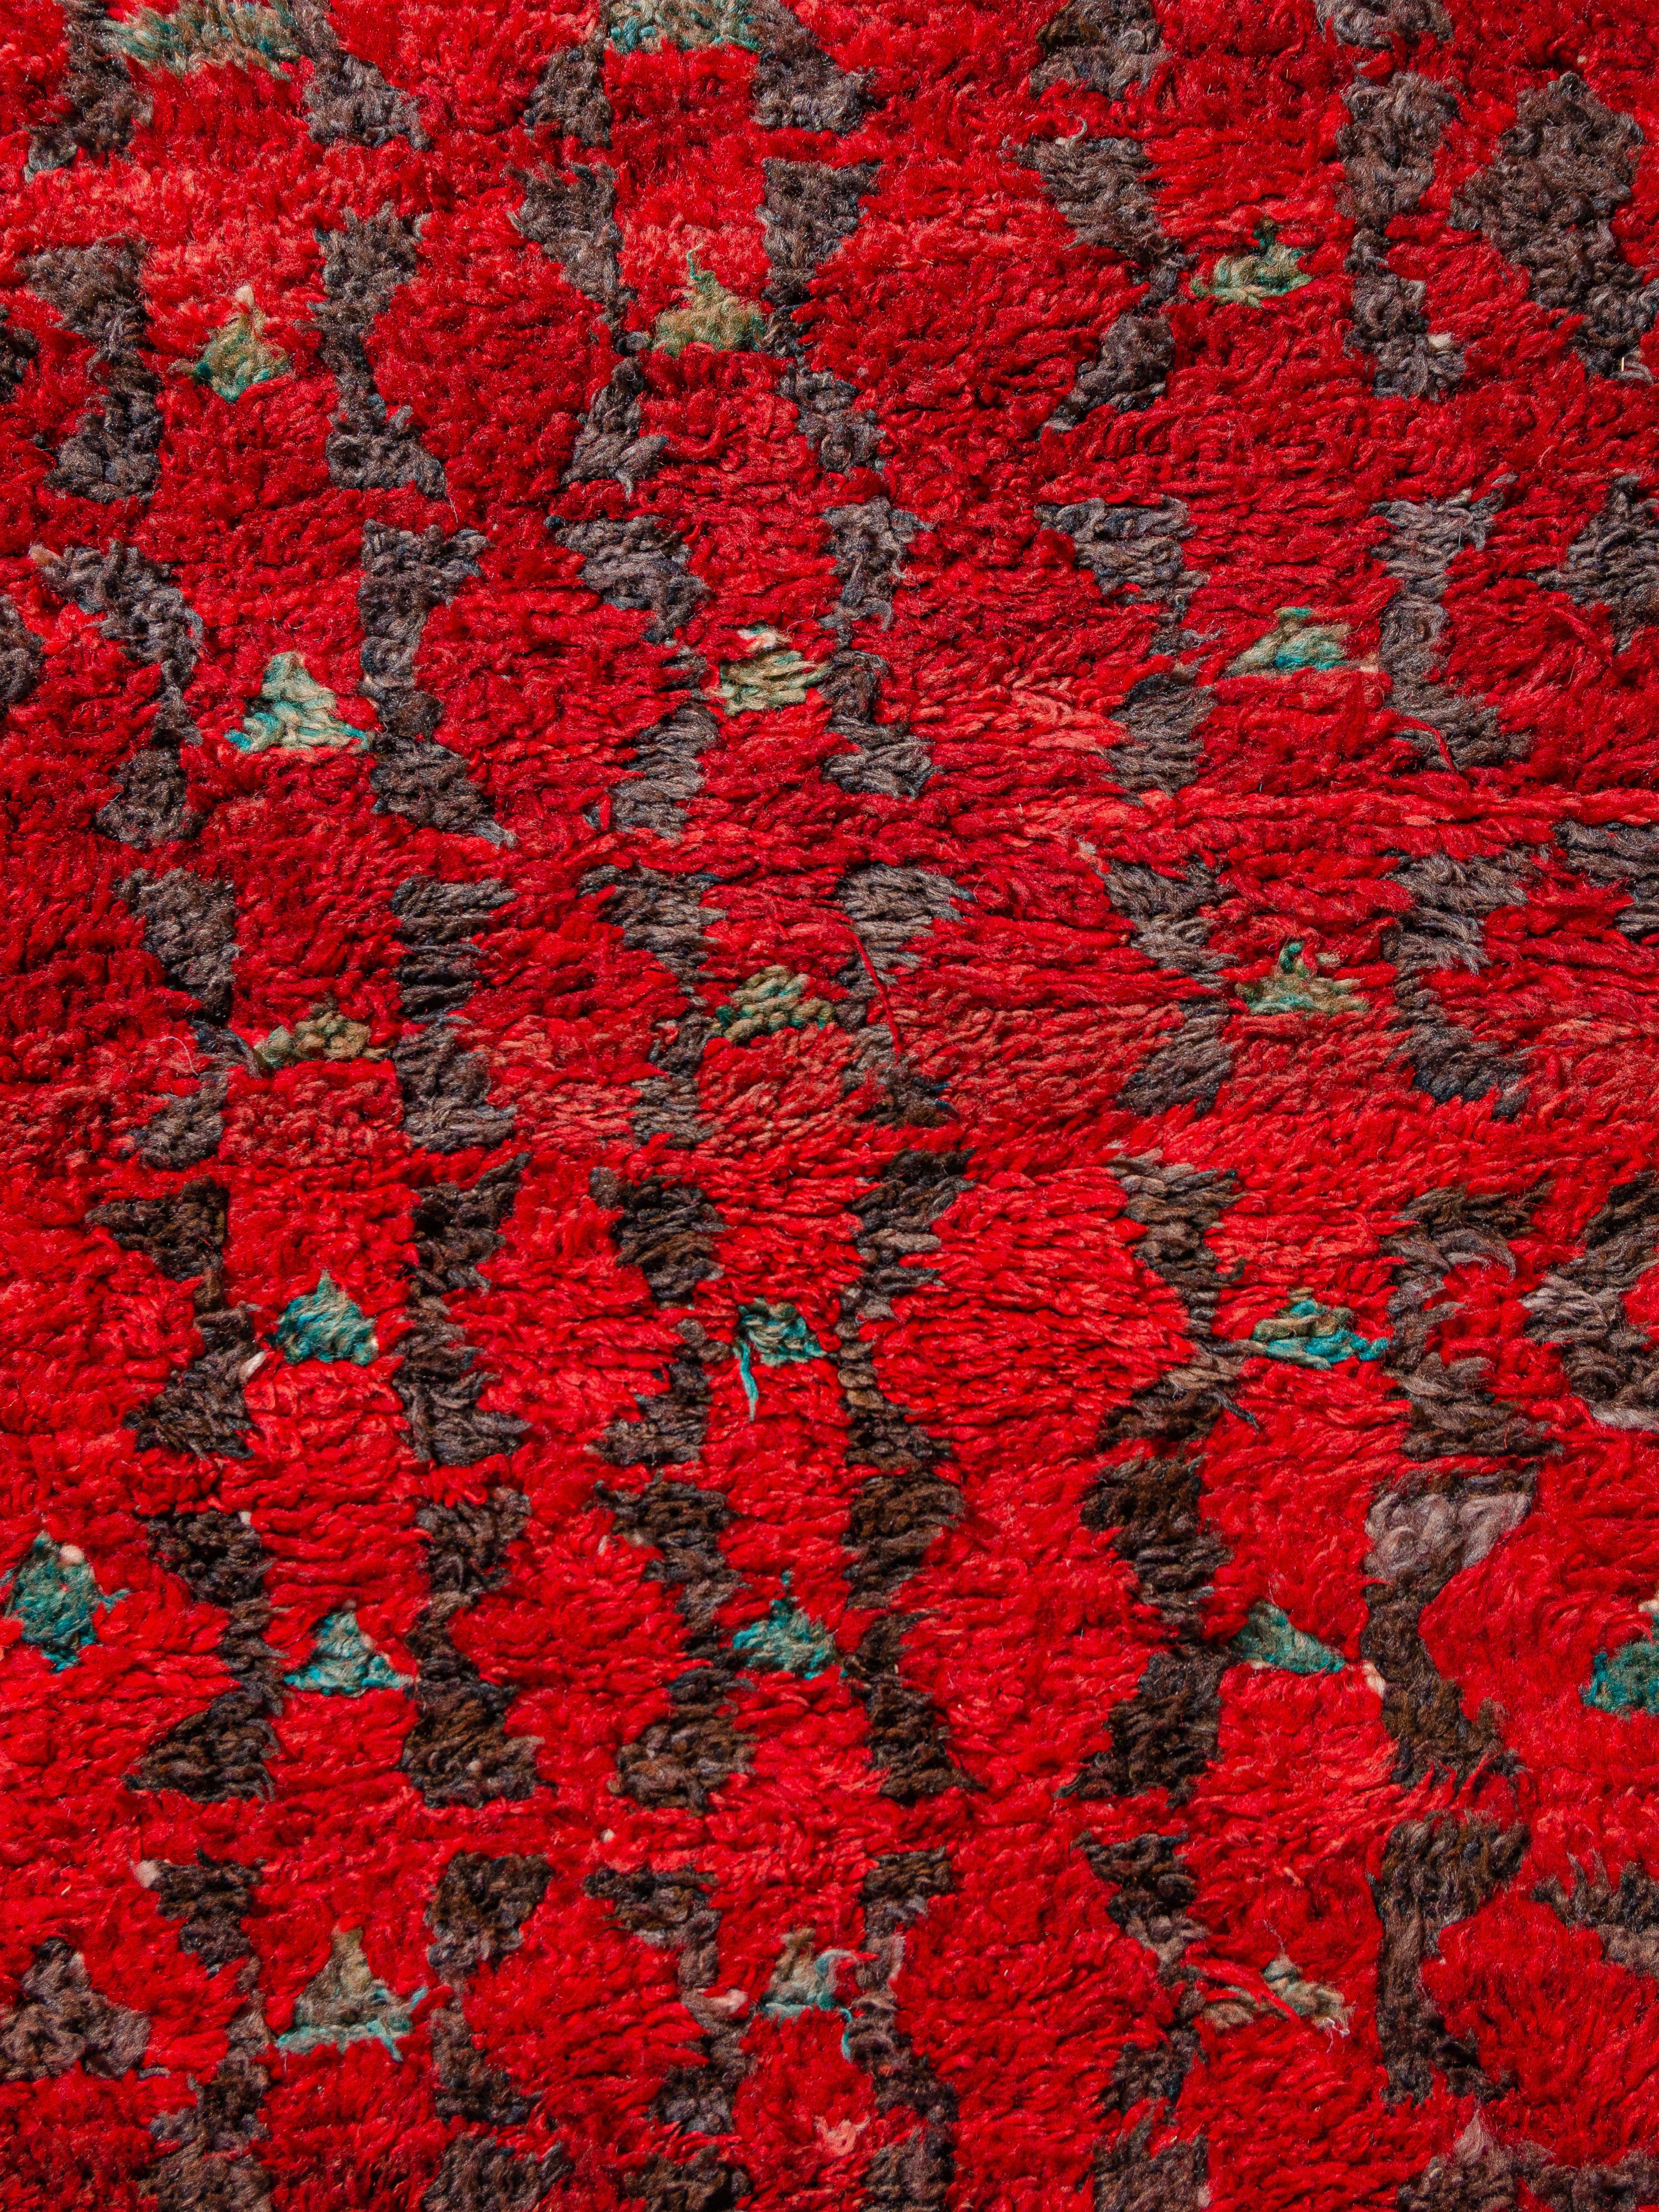 Incredibly vibrant Aït Bou Ichaouen (Talsint) vintage Moroccan carpet with linear symbols in charcoal and teal over an abrashed field of fiery red ground. The densely knotted pile has a subtle hand and a time-faded patina. Notice the interesting